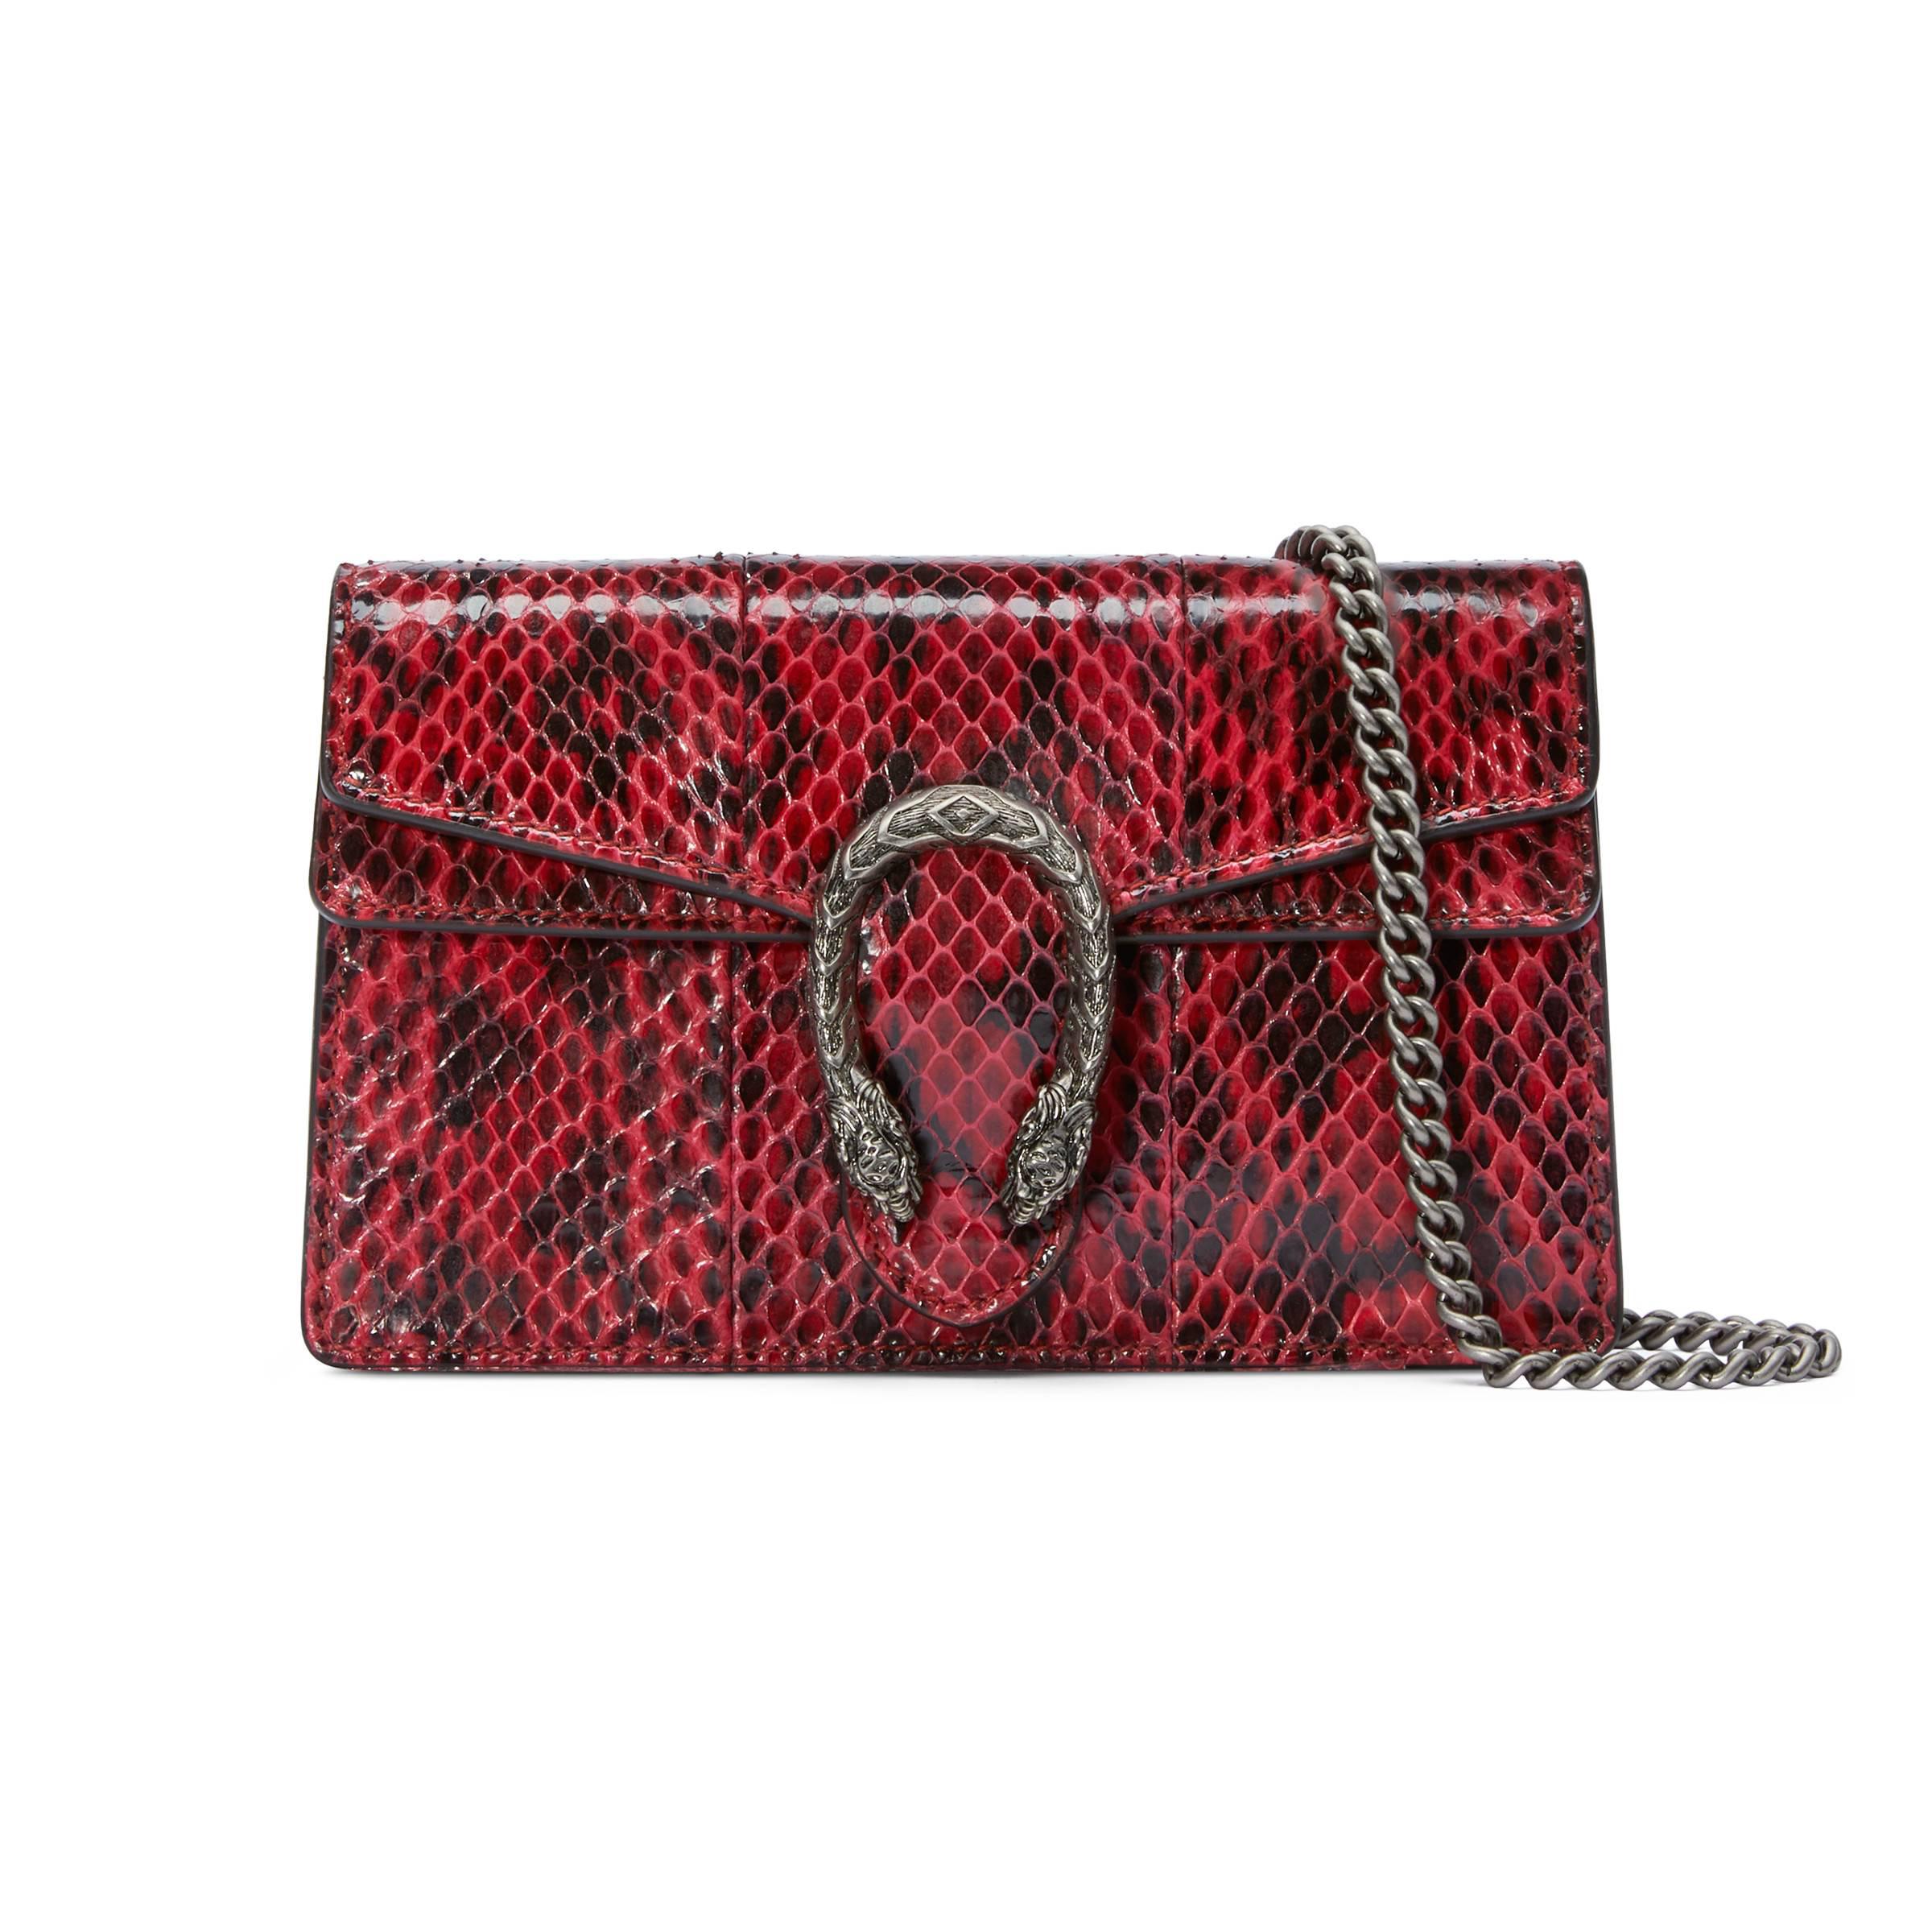 Gucci Leather Dionysus Super Mini Snakeskin Bag in Red - Lyst